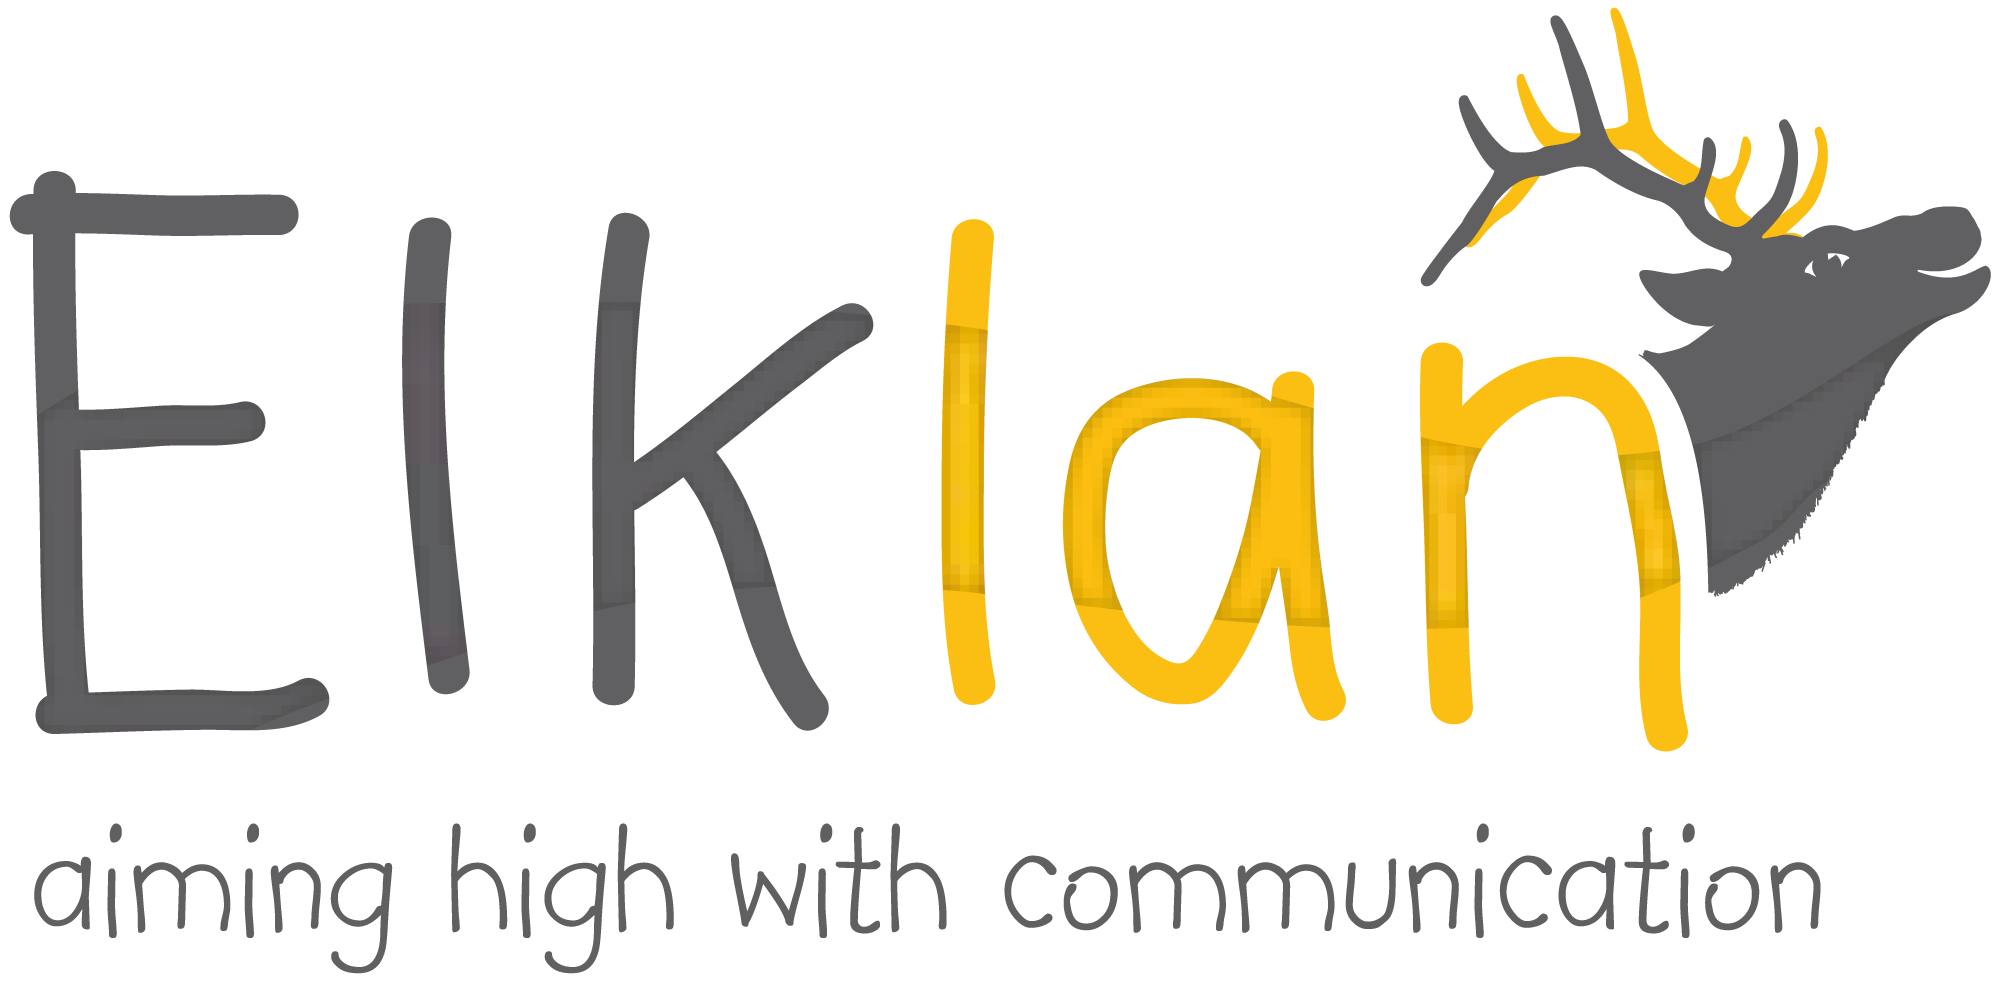 Elklan - aiming high with communication